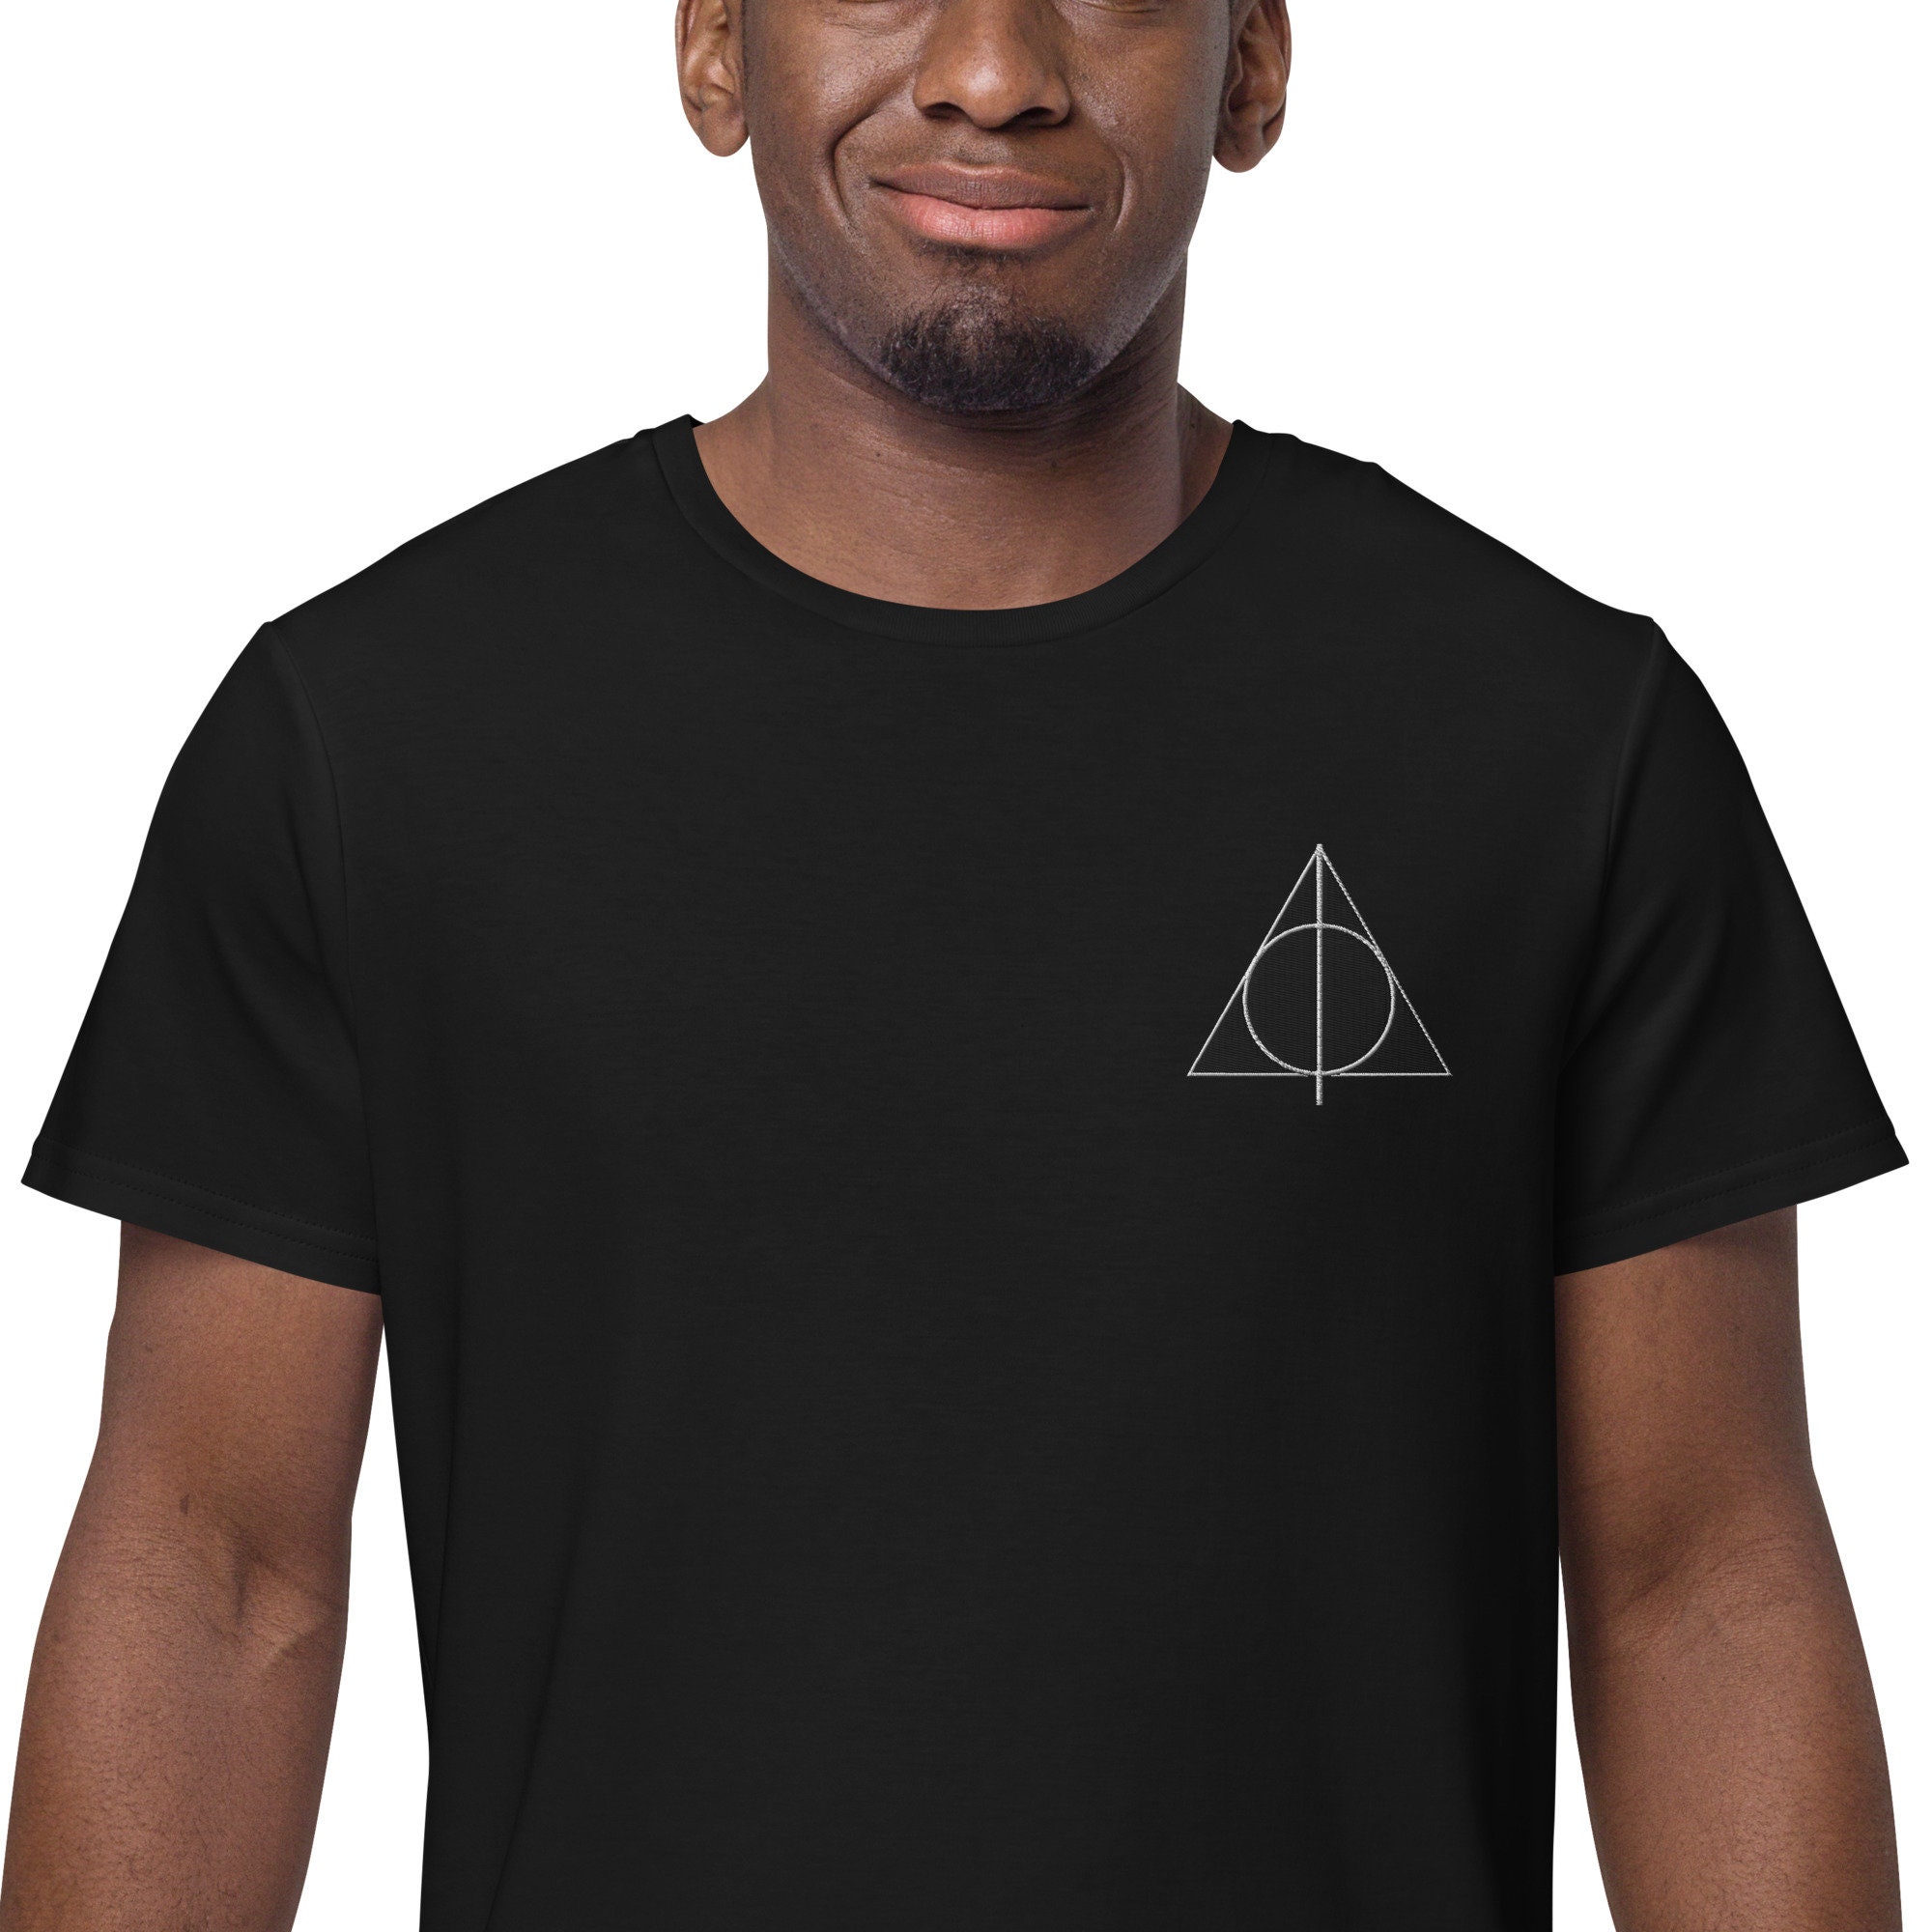 Pastele New Harry Potter and the Deathly Hallows Custom Unisex